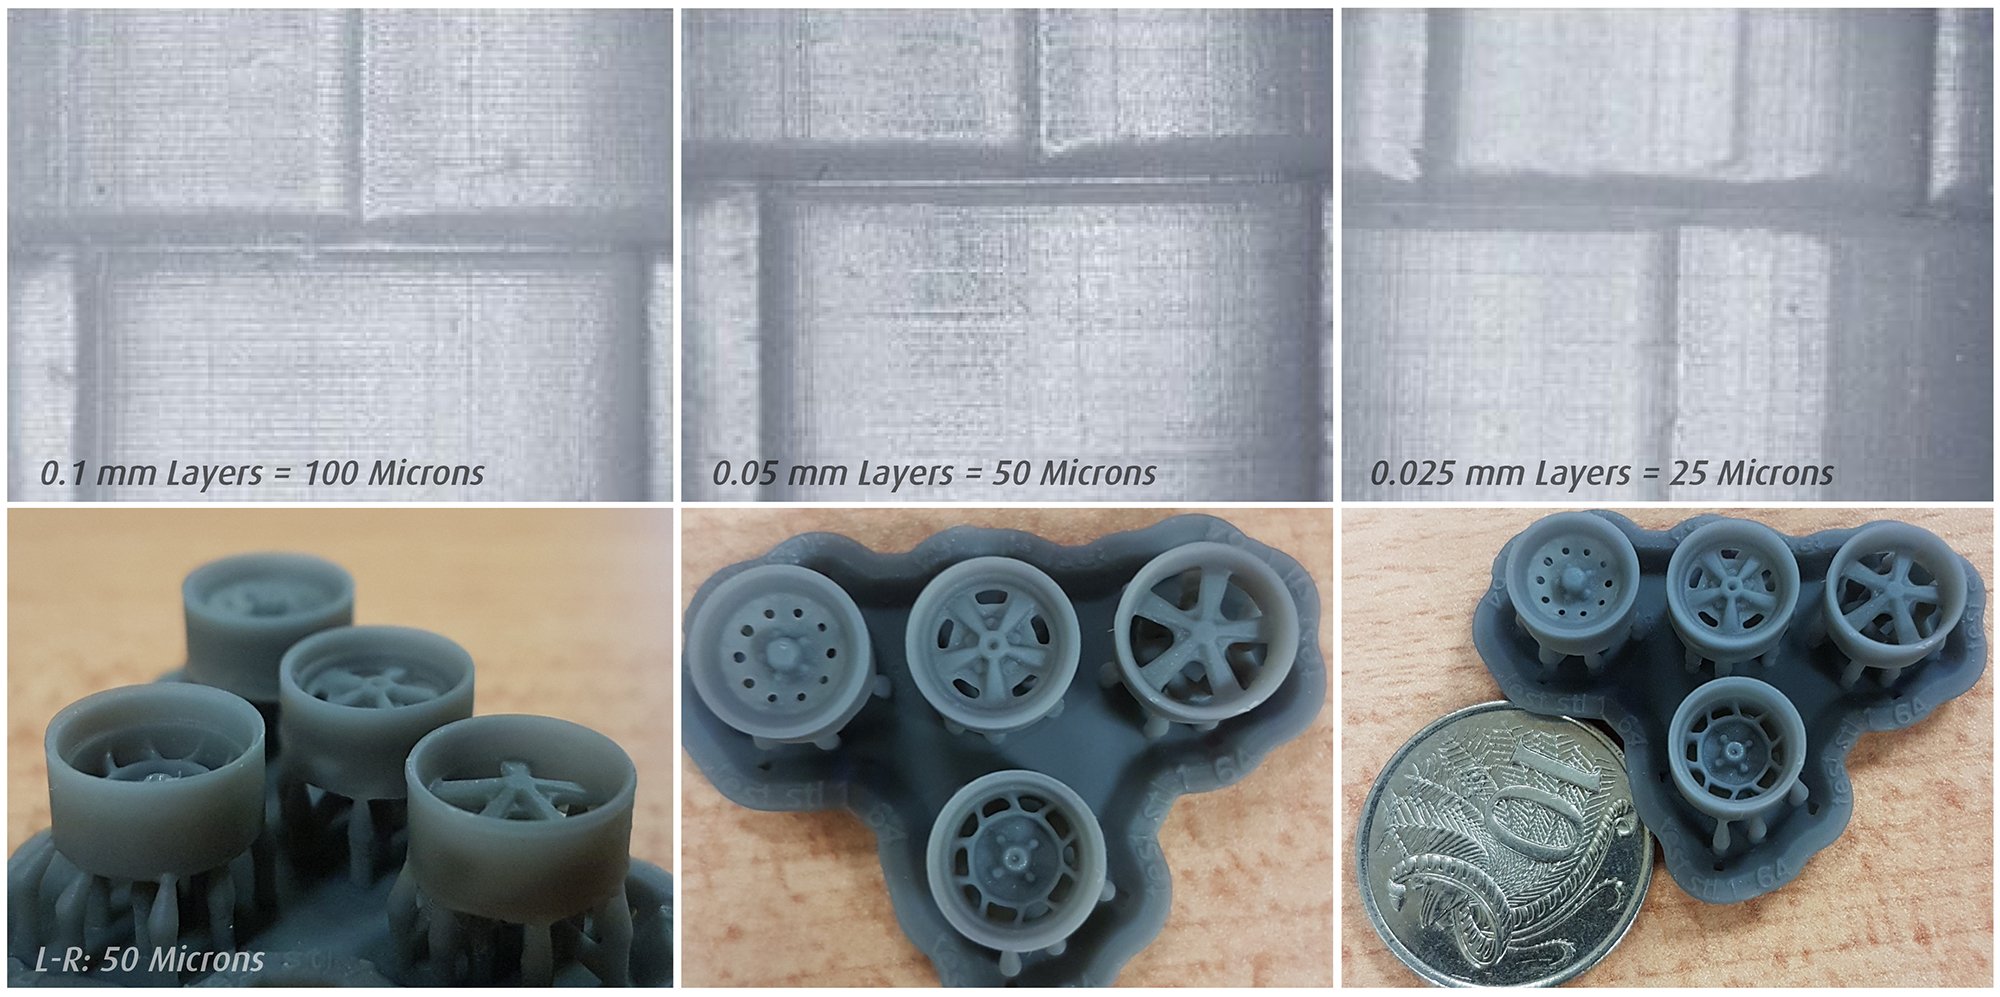 knude Defekt dragt A2K Store on Twitter: "Our miniature 3D printed mag wheels at 50 microns  produced by our Form 2 Printer. The lower the microns, the detail  increases. Our Form 2 3D Printers are